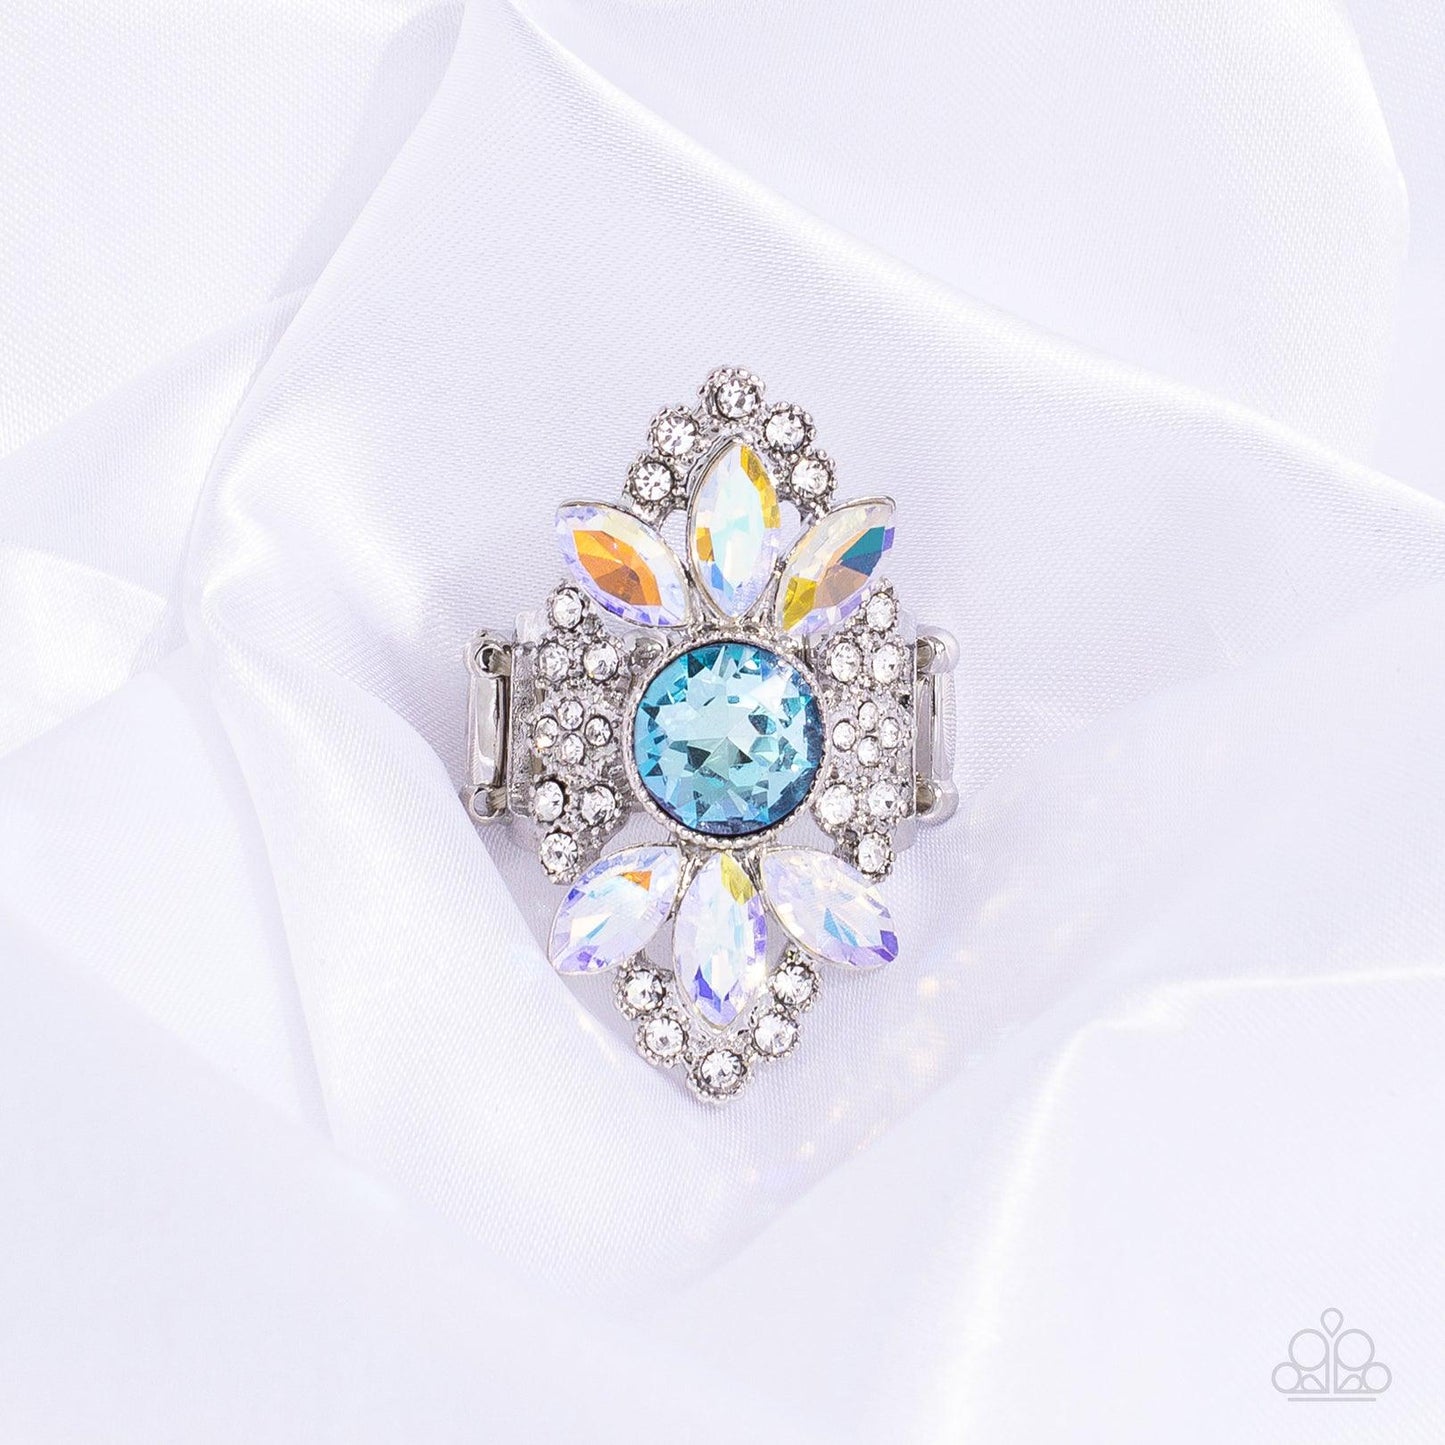 Paparazzi Accessories - GLISTEN Here! - Blue Ring - Bling by JessieK